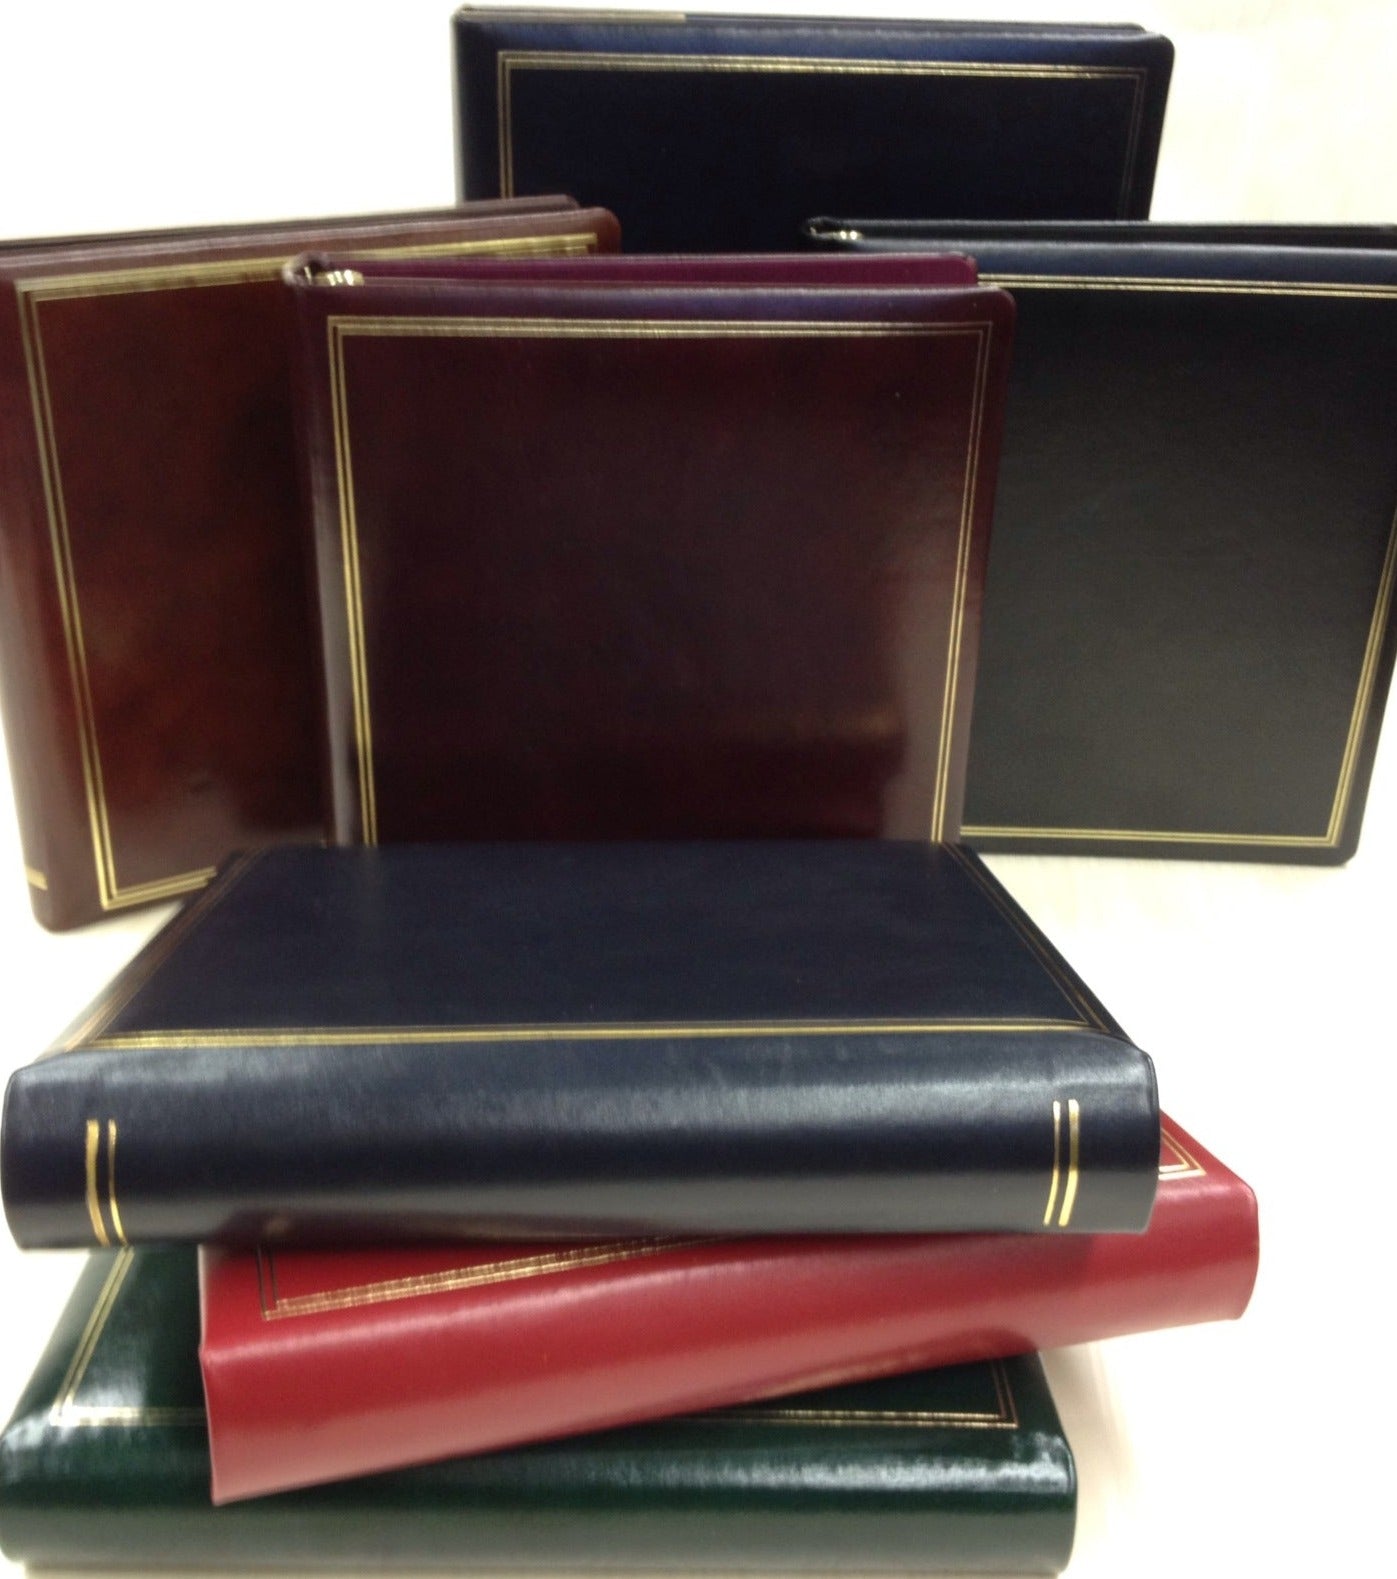 Leather Table Planner | Residential Size | Place Arranger with Gold Tooling | 8 by 14" | Custom Production | Made in USA